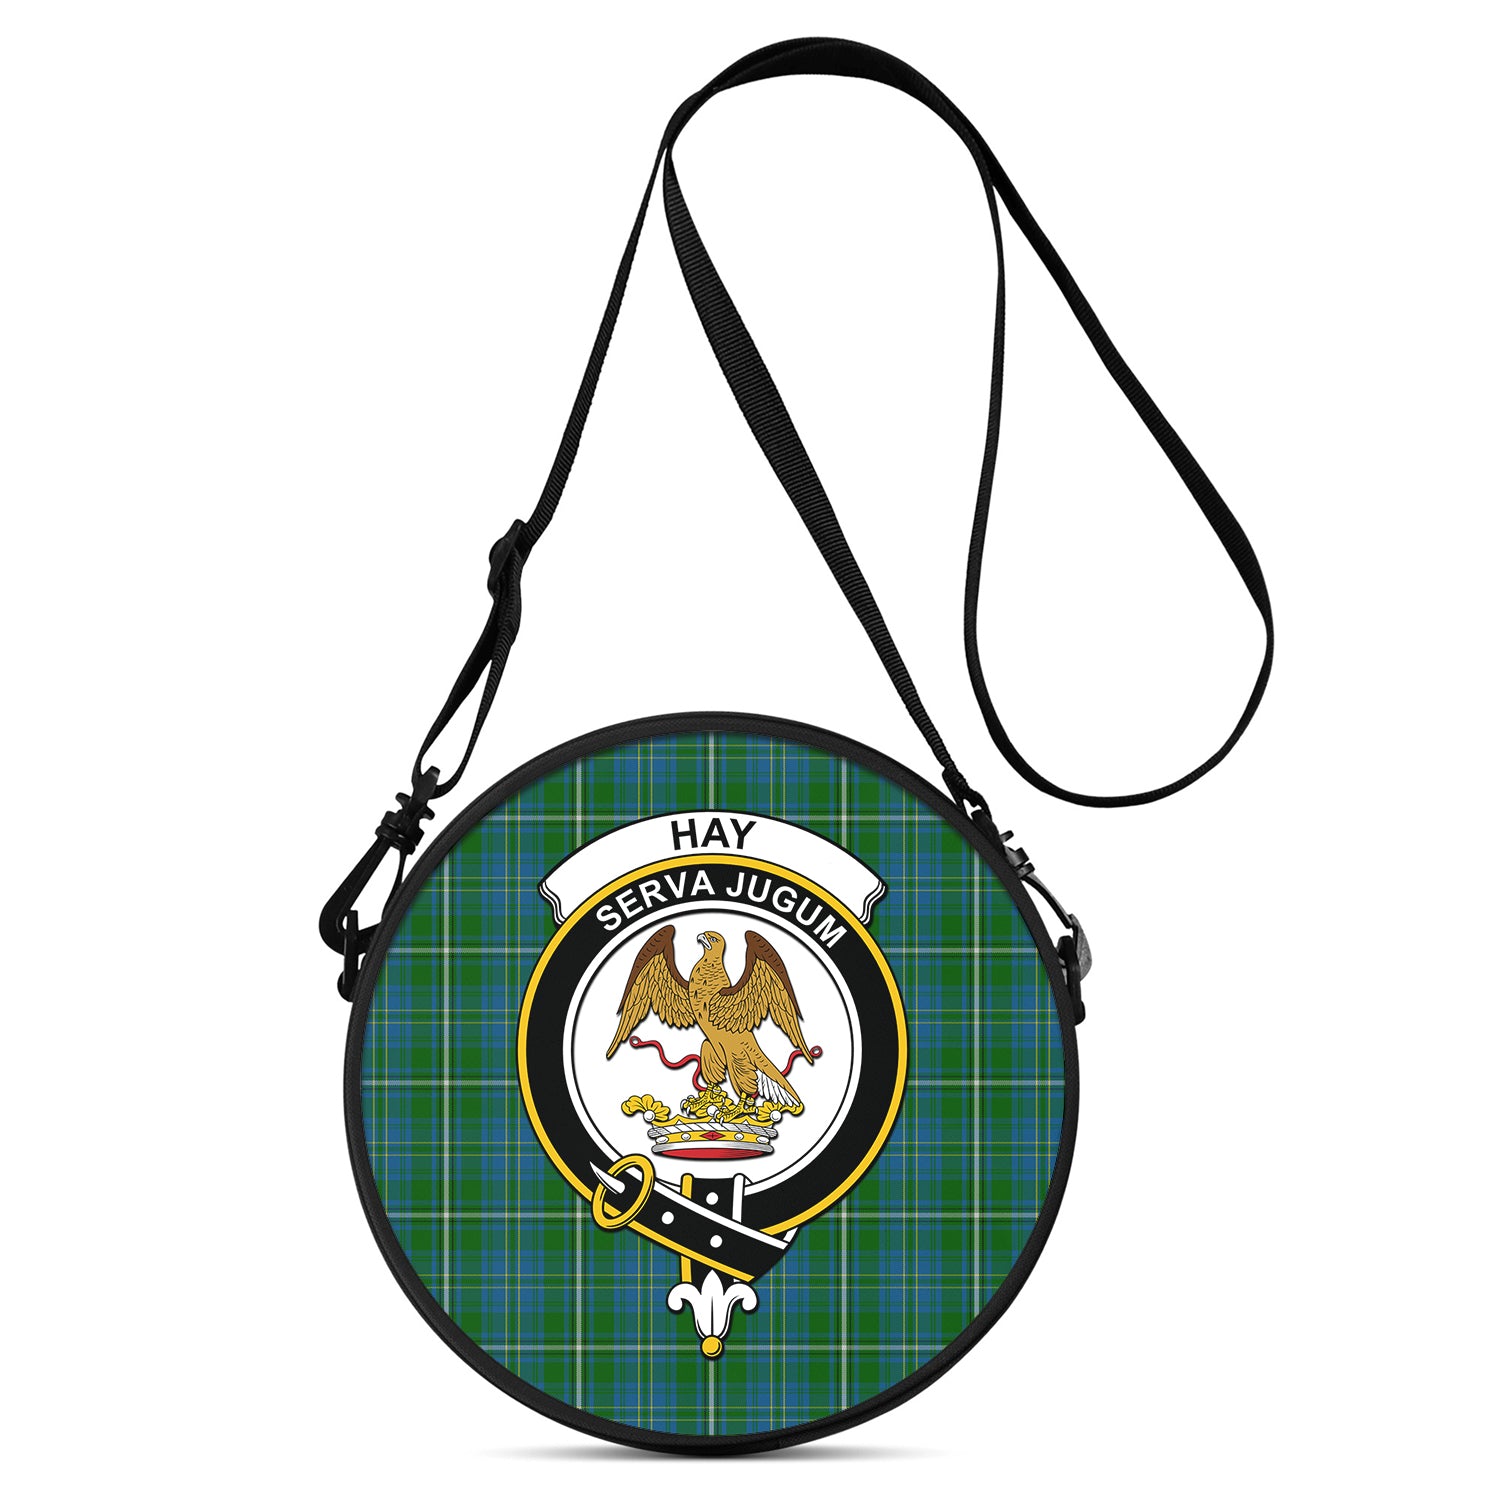 hay-hunting-tartan-round-satchel-bags-with-family-crest